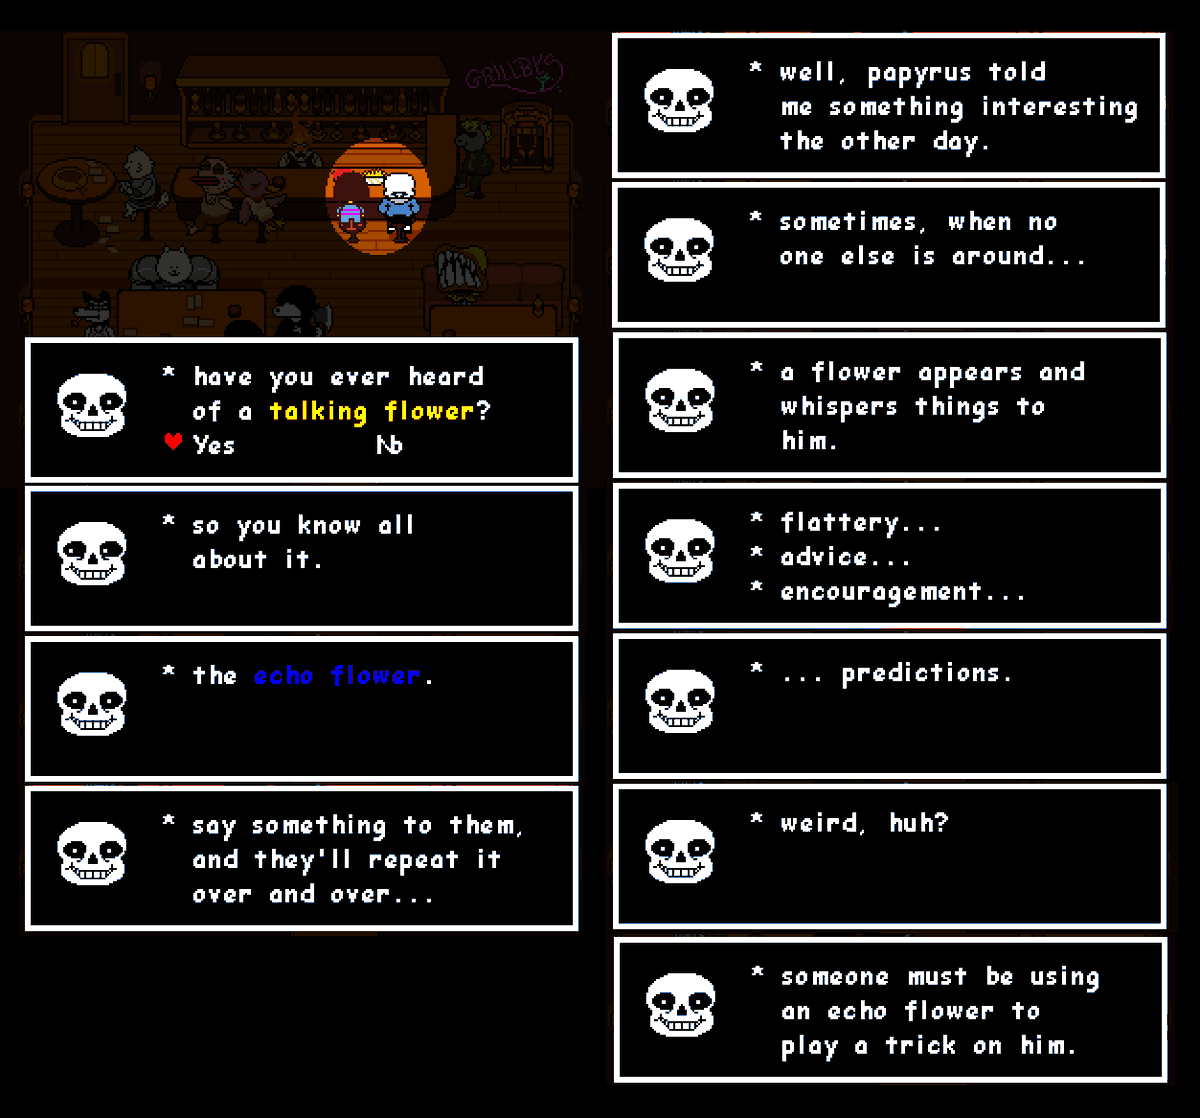 Semi Frequent Undertale Facts on X: * Sans's theme can be found